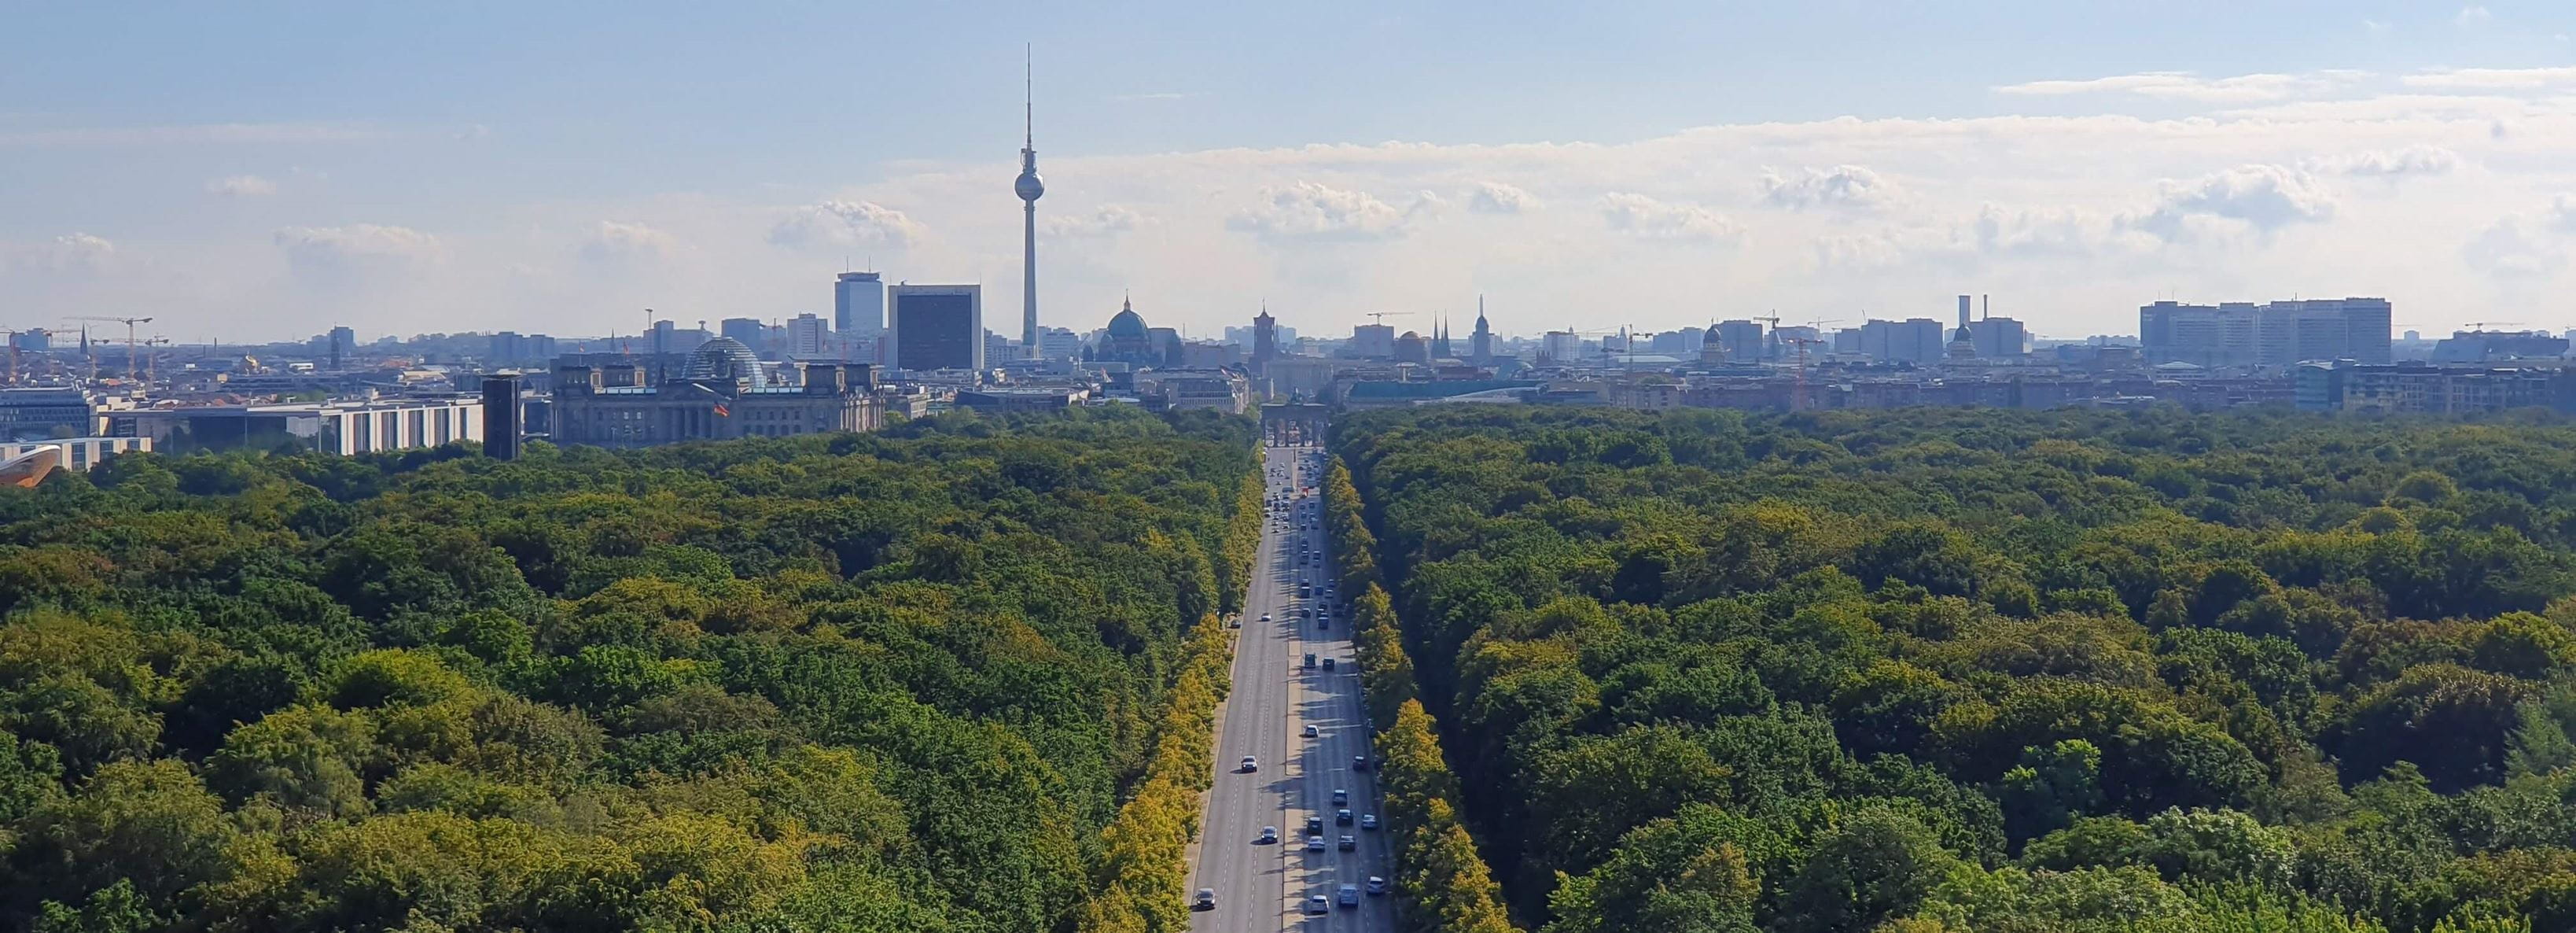 Berlin - road leading into city surronded by greenery